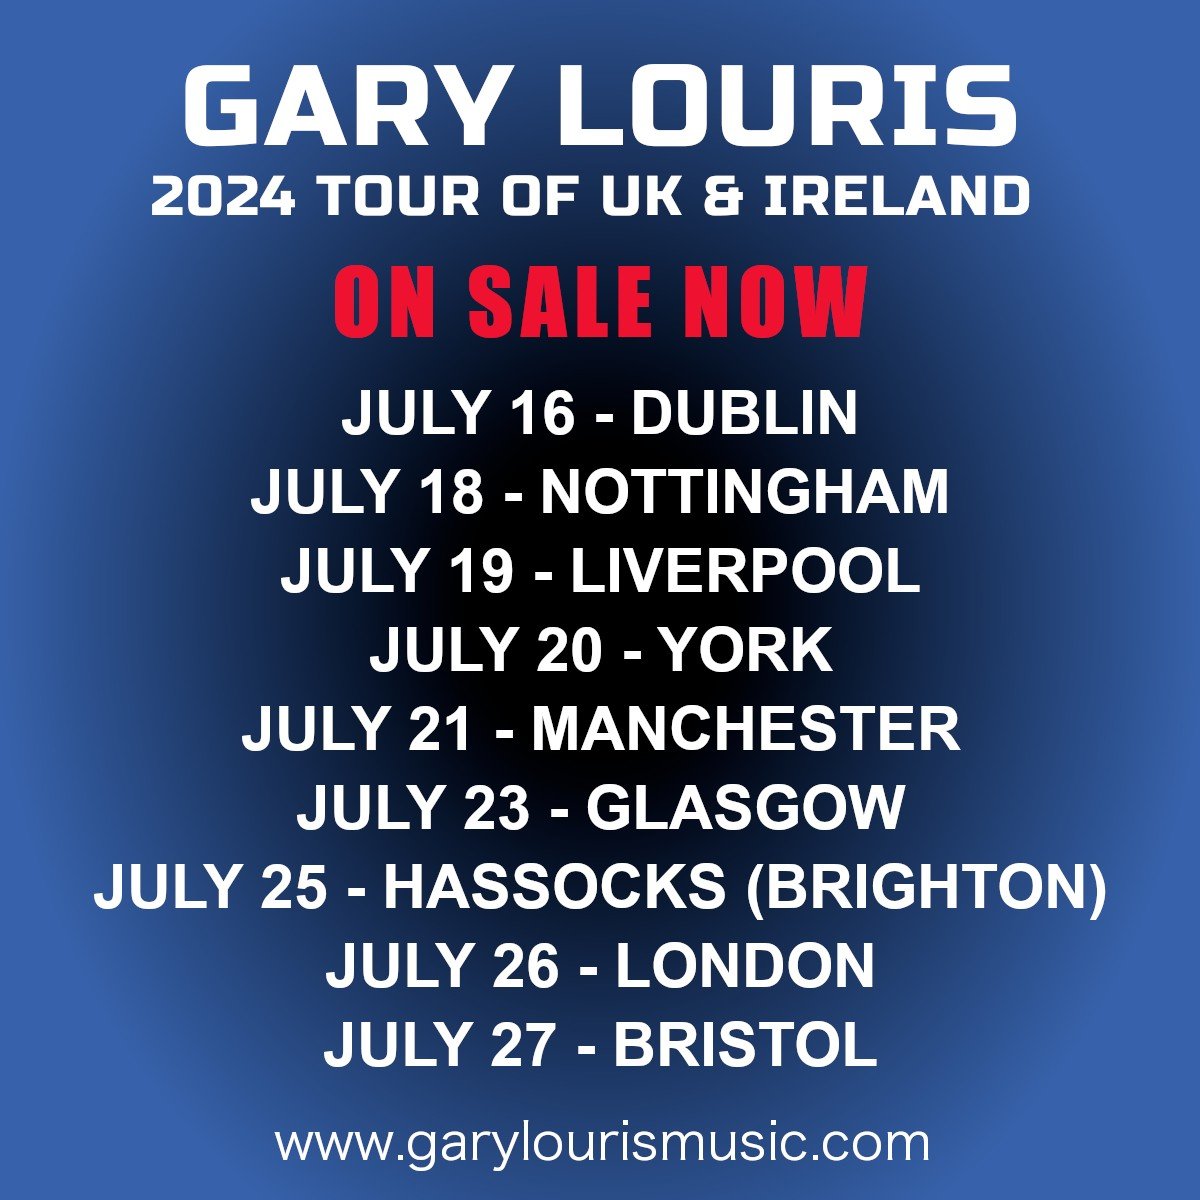 Tickets are now on sale for the Gary Louris UK / Ireland solo tour in July. 

JULY 16 - Dublin, Ireland - Whelan&rsquo;s
JULY 18 - Nottingham, England - Bodega
JULY 19 - Liverpool, England - Liverpool Philharmonic Music Room 
JULY 20 - York, England 